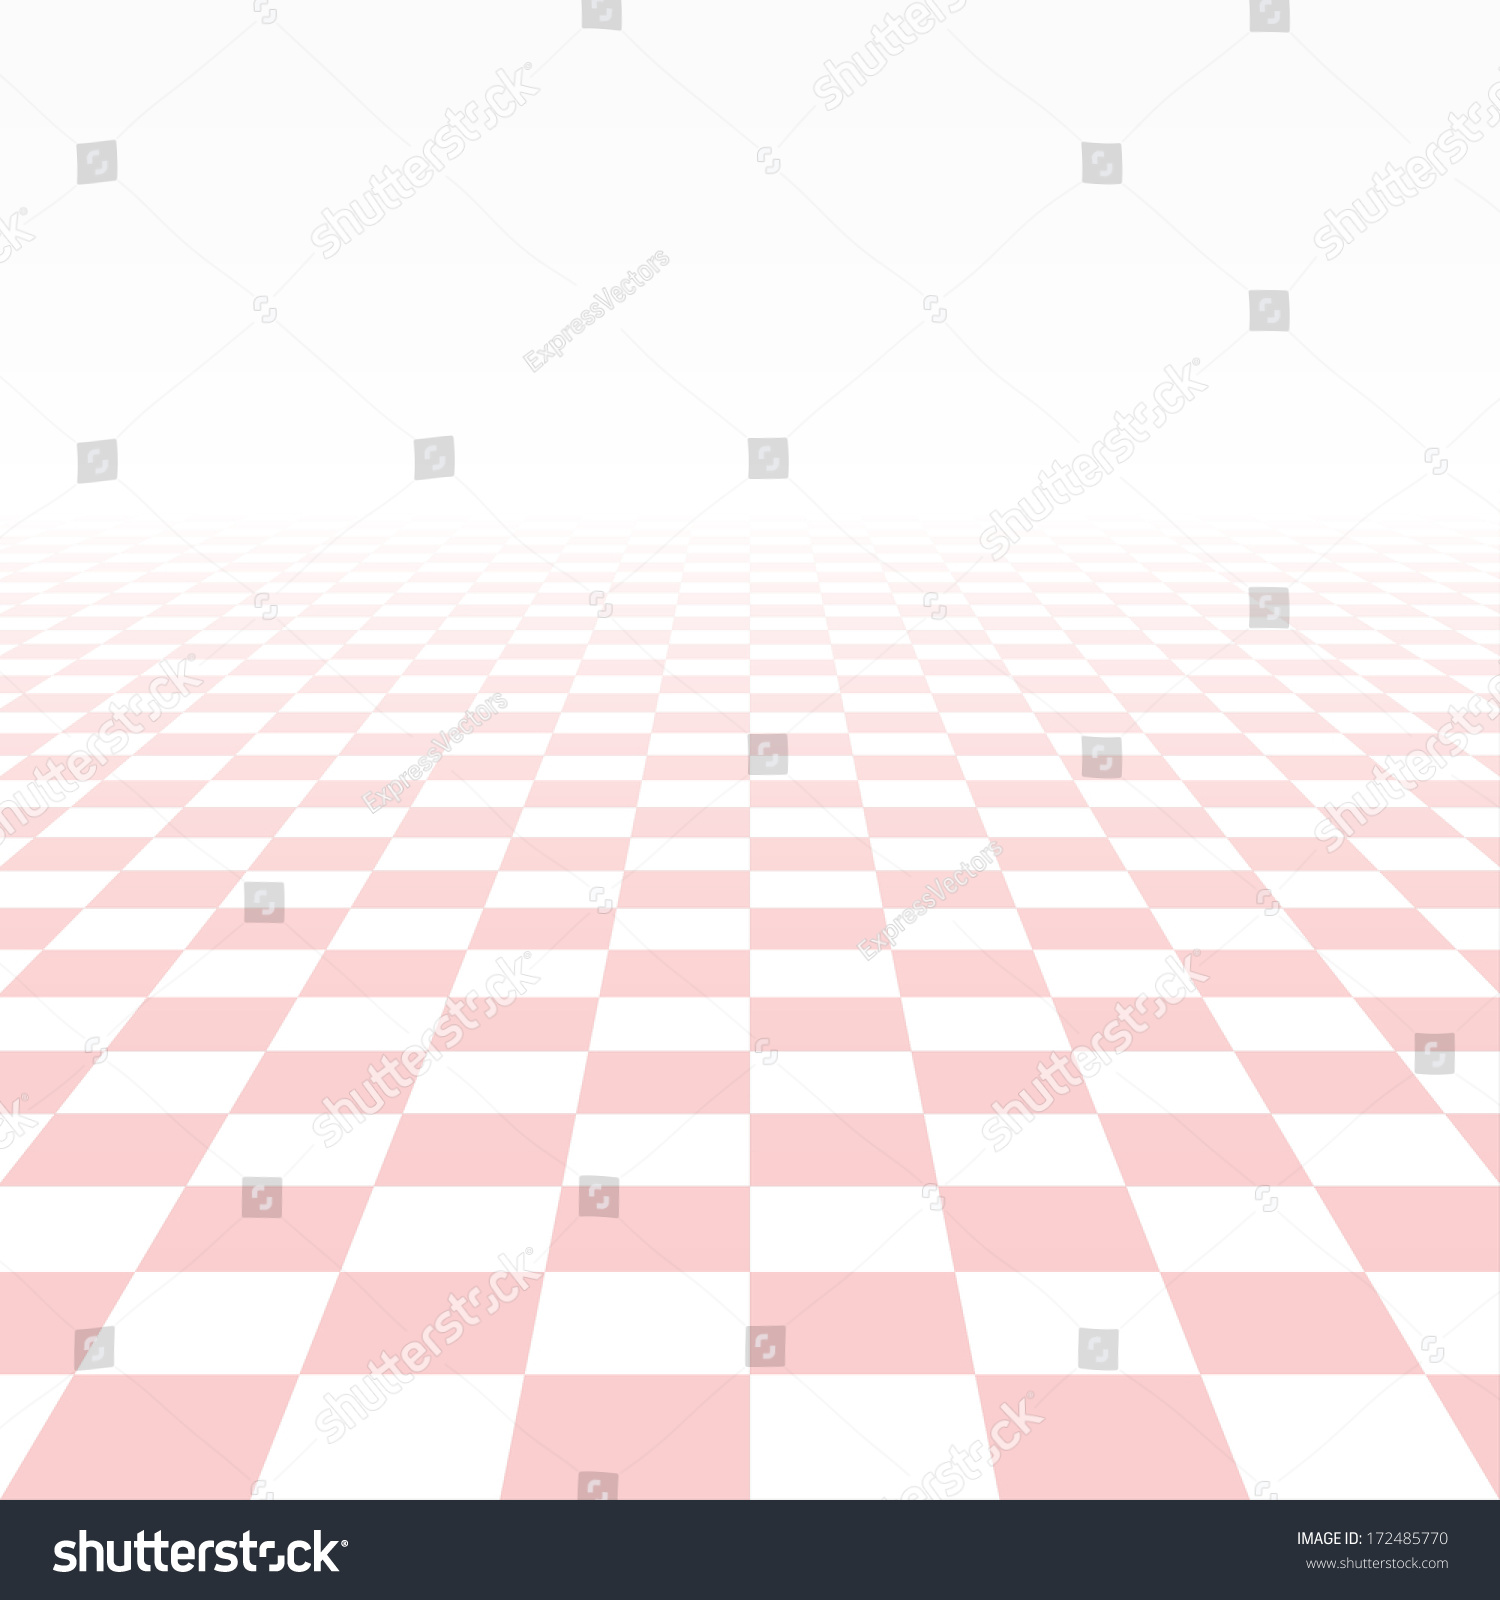 Abstract Background Tiled Floor Vector Illustration Stock Vector